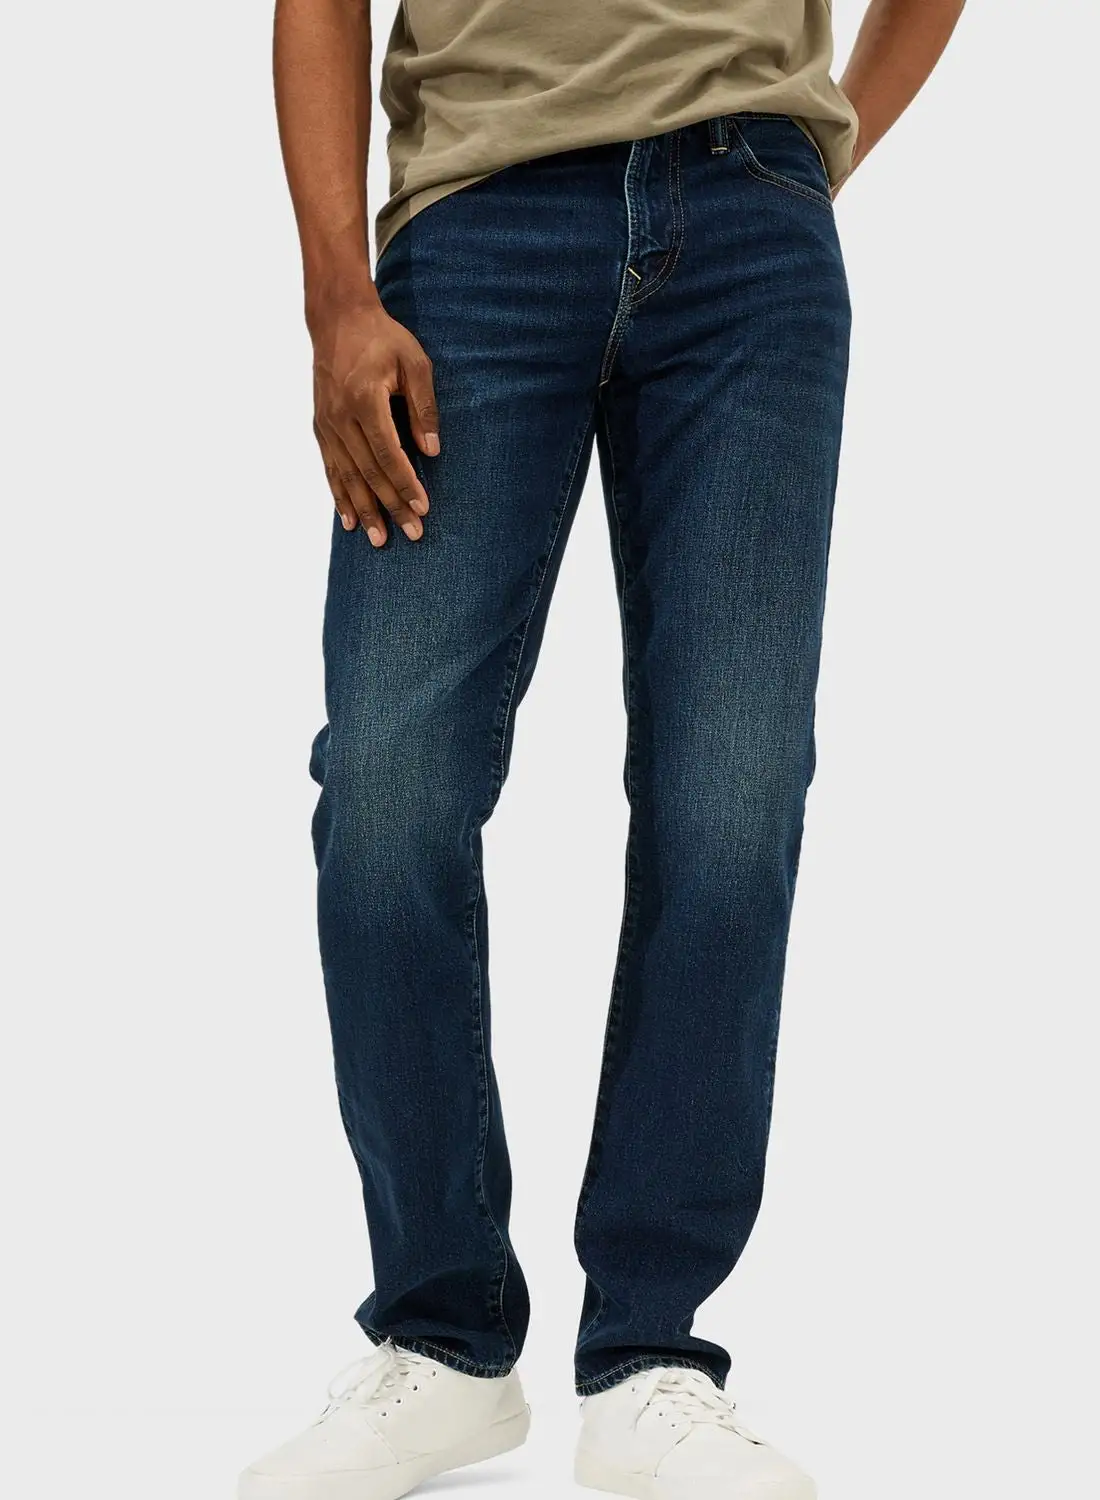 American Eagle Dark Wash Straight Fit Jeans